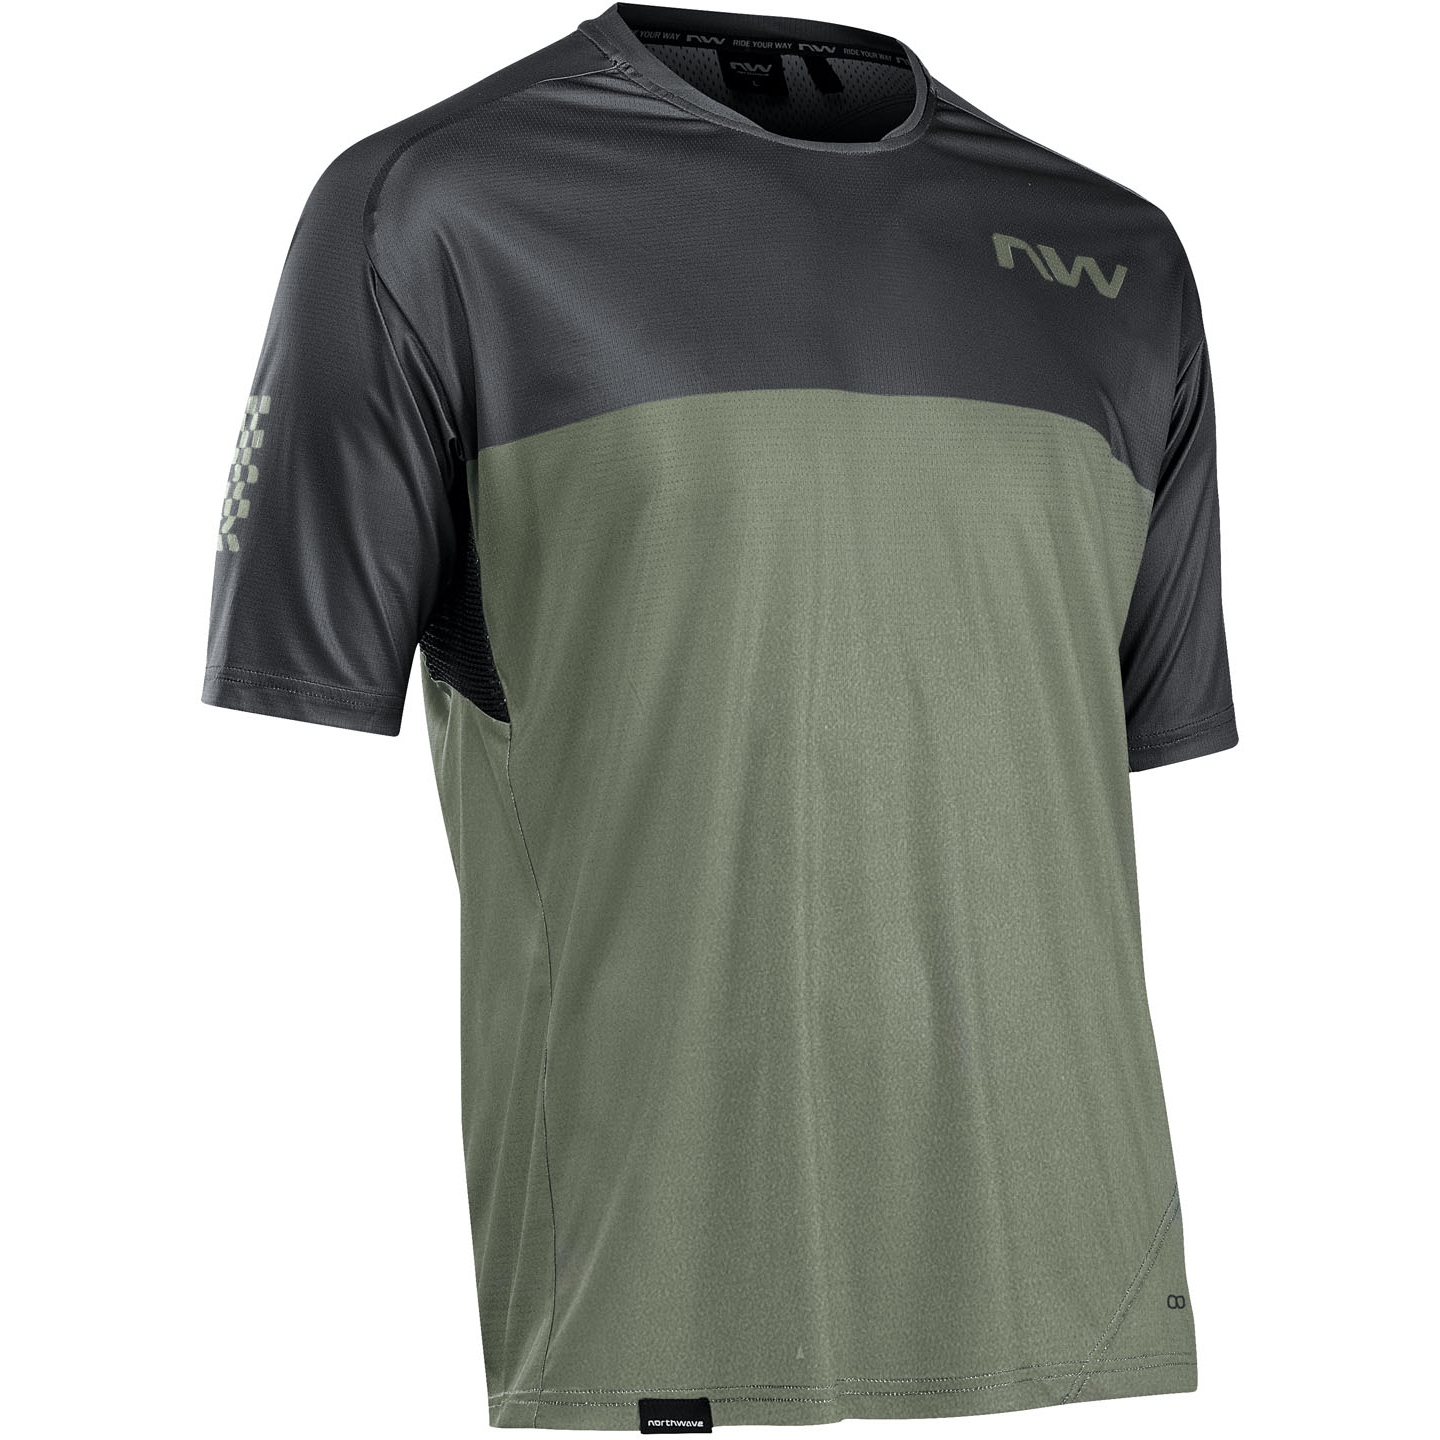 Picture of Northwave Edge Short Sleeve Jersey Men - black/forest green 02